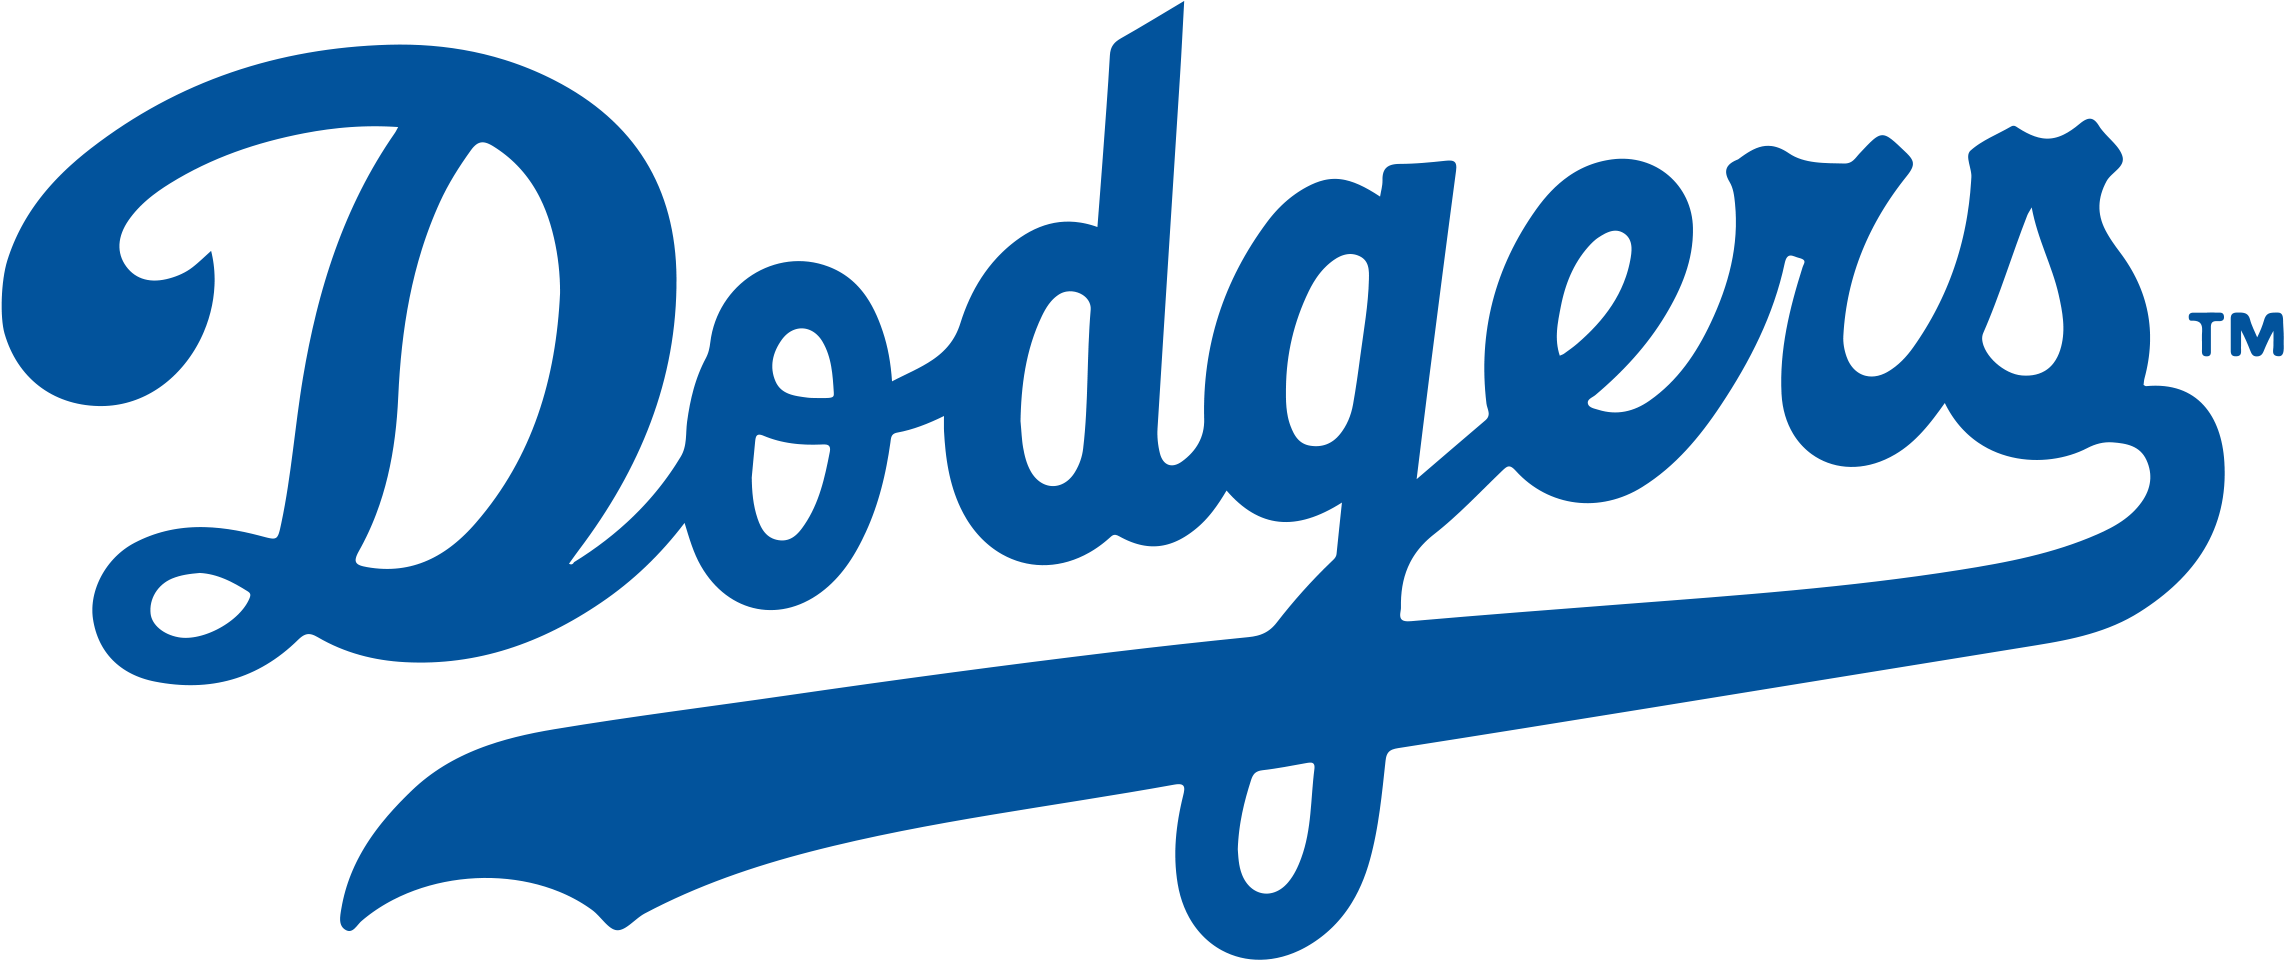 Los Angeles Dodgers Download Free PNG